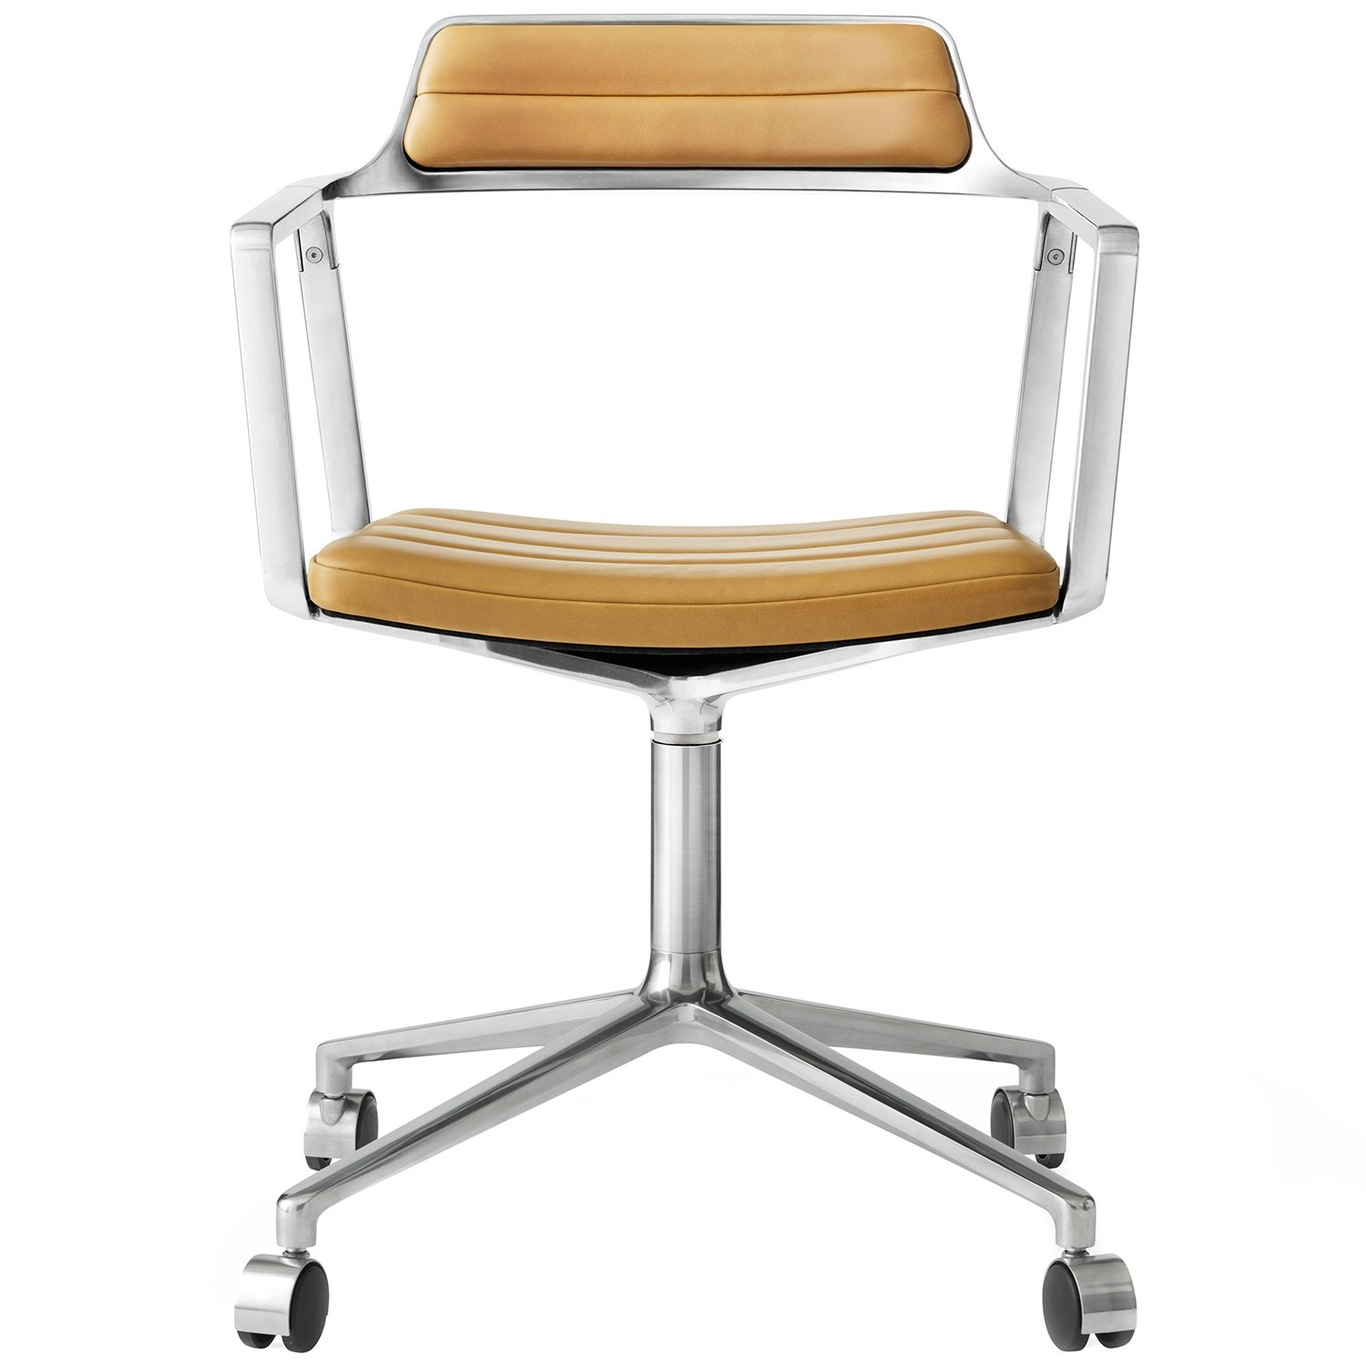 452 Swivel Chair With Wheels, Polished Aluminium / Sand Coloured Leather